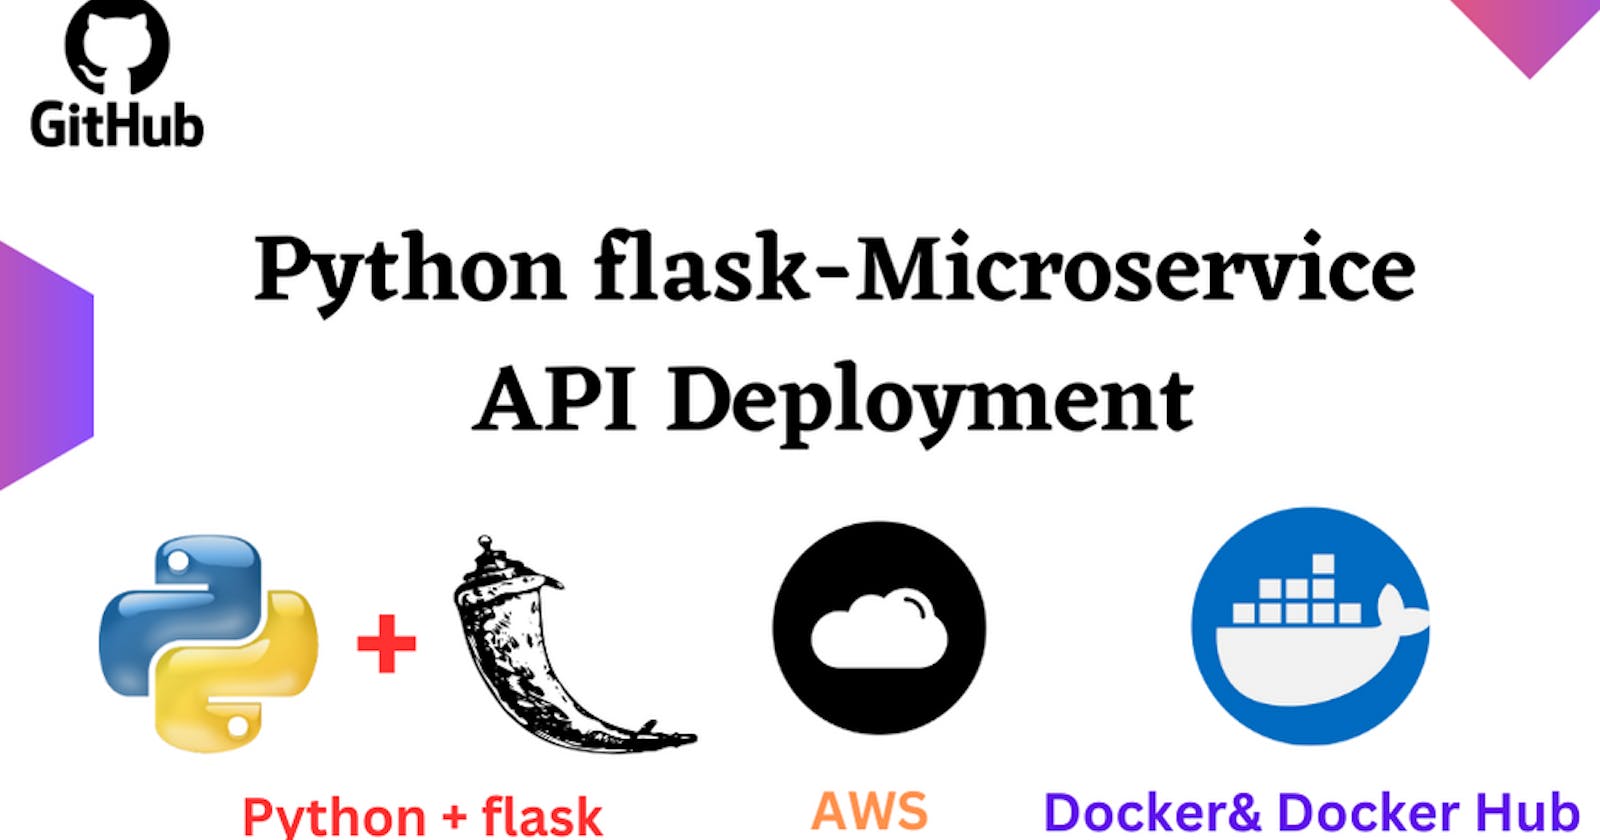 Deploy Microservice flask-API in the Docker container with the help of Dockerfile and  AWS.